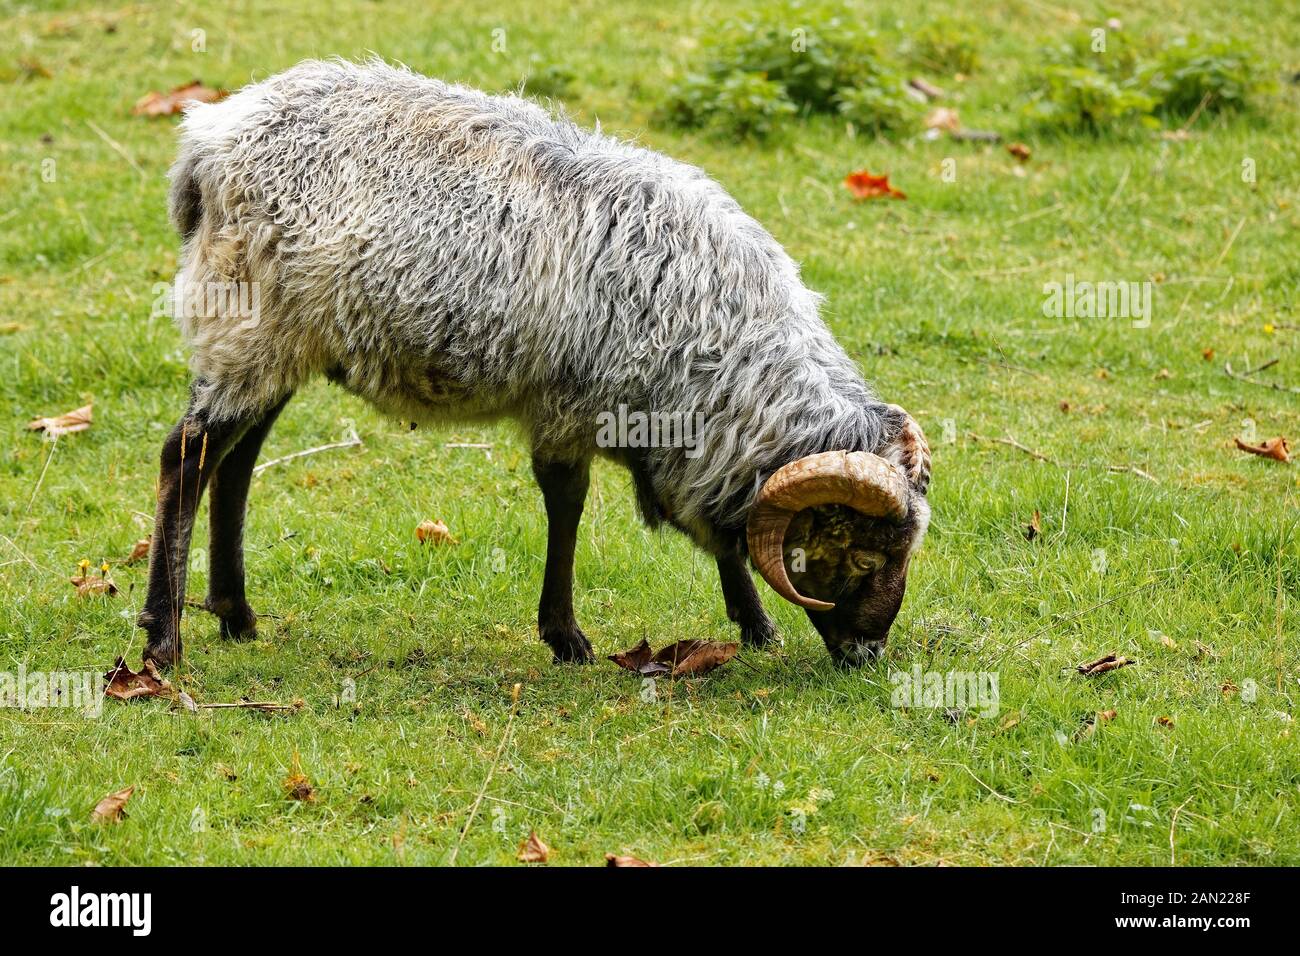 Sheep stands on a hill on the expanse in the grass Stock Photo